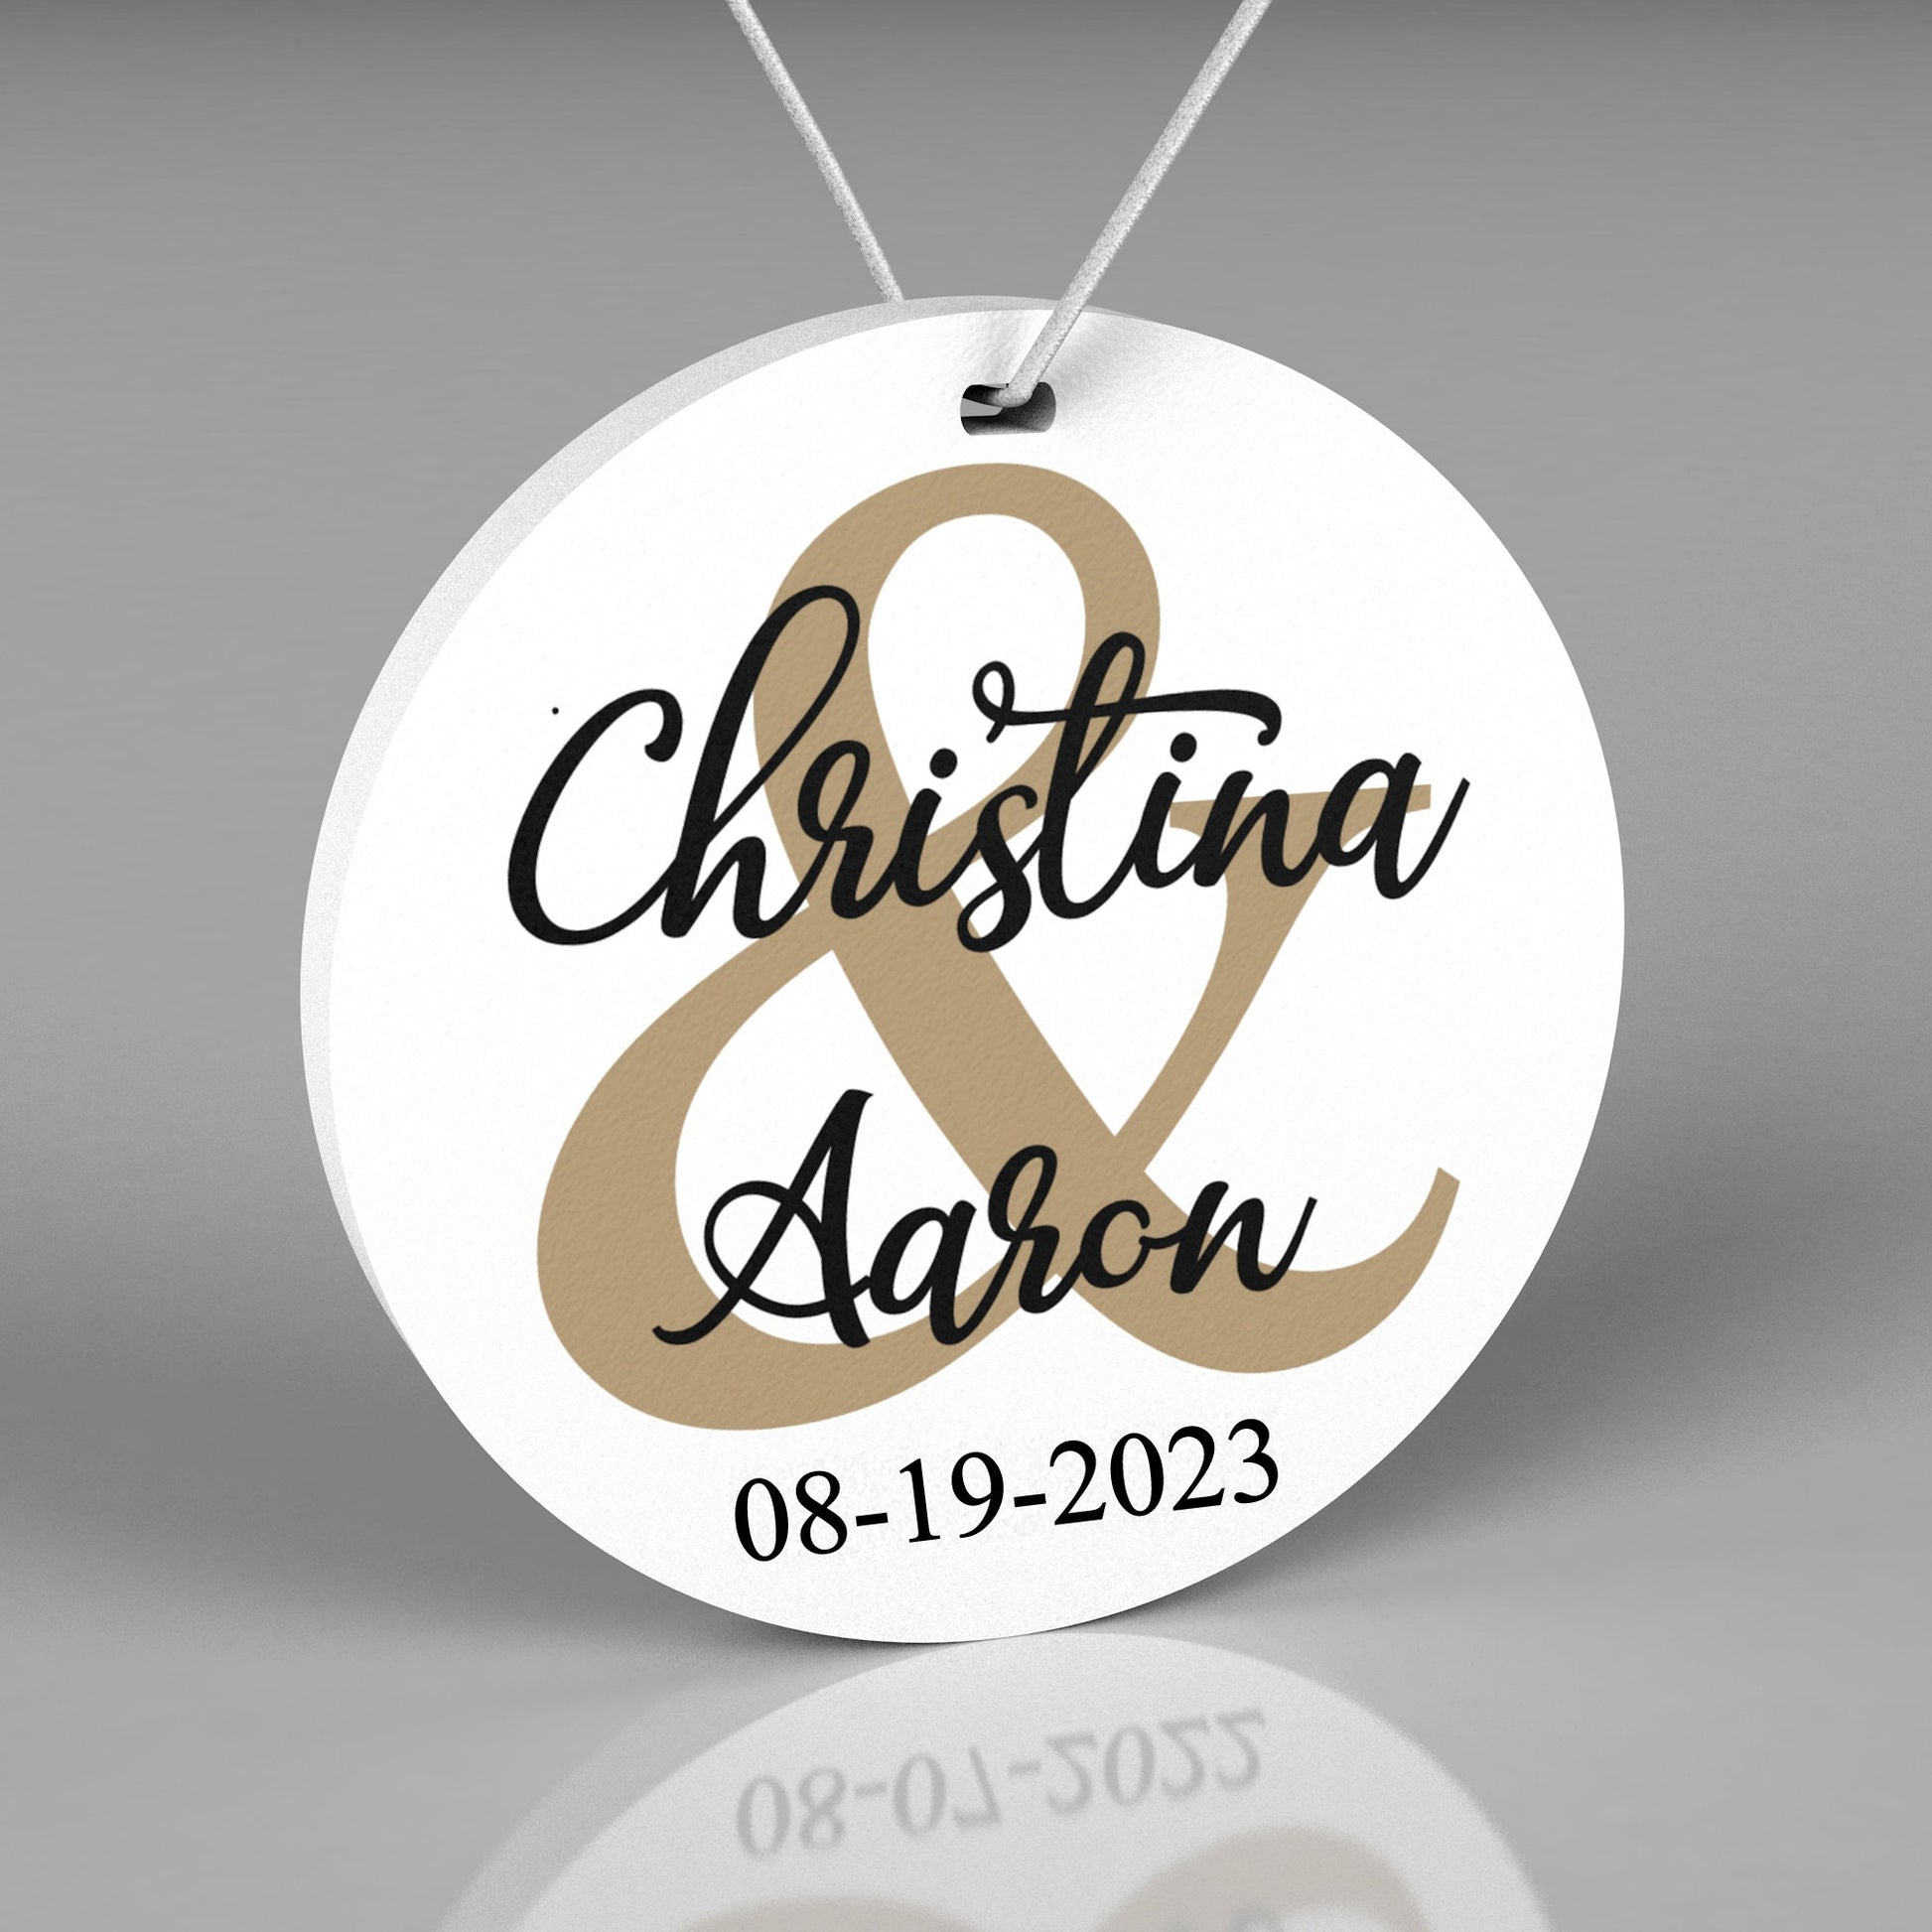 Personalized Couples Christmas Ornament for Engagement 2023, Wedding or New Couple Gifts with Gift Box